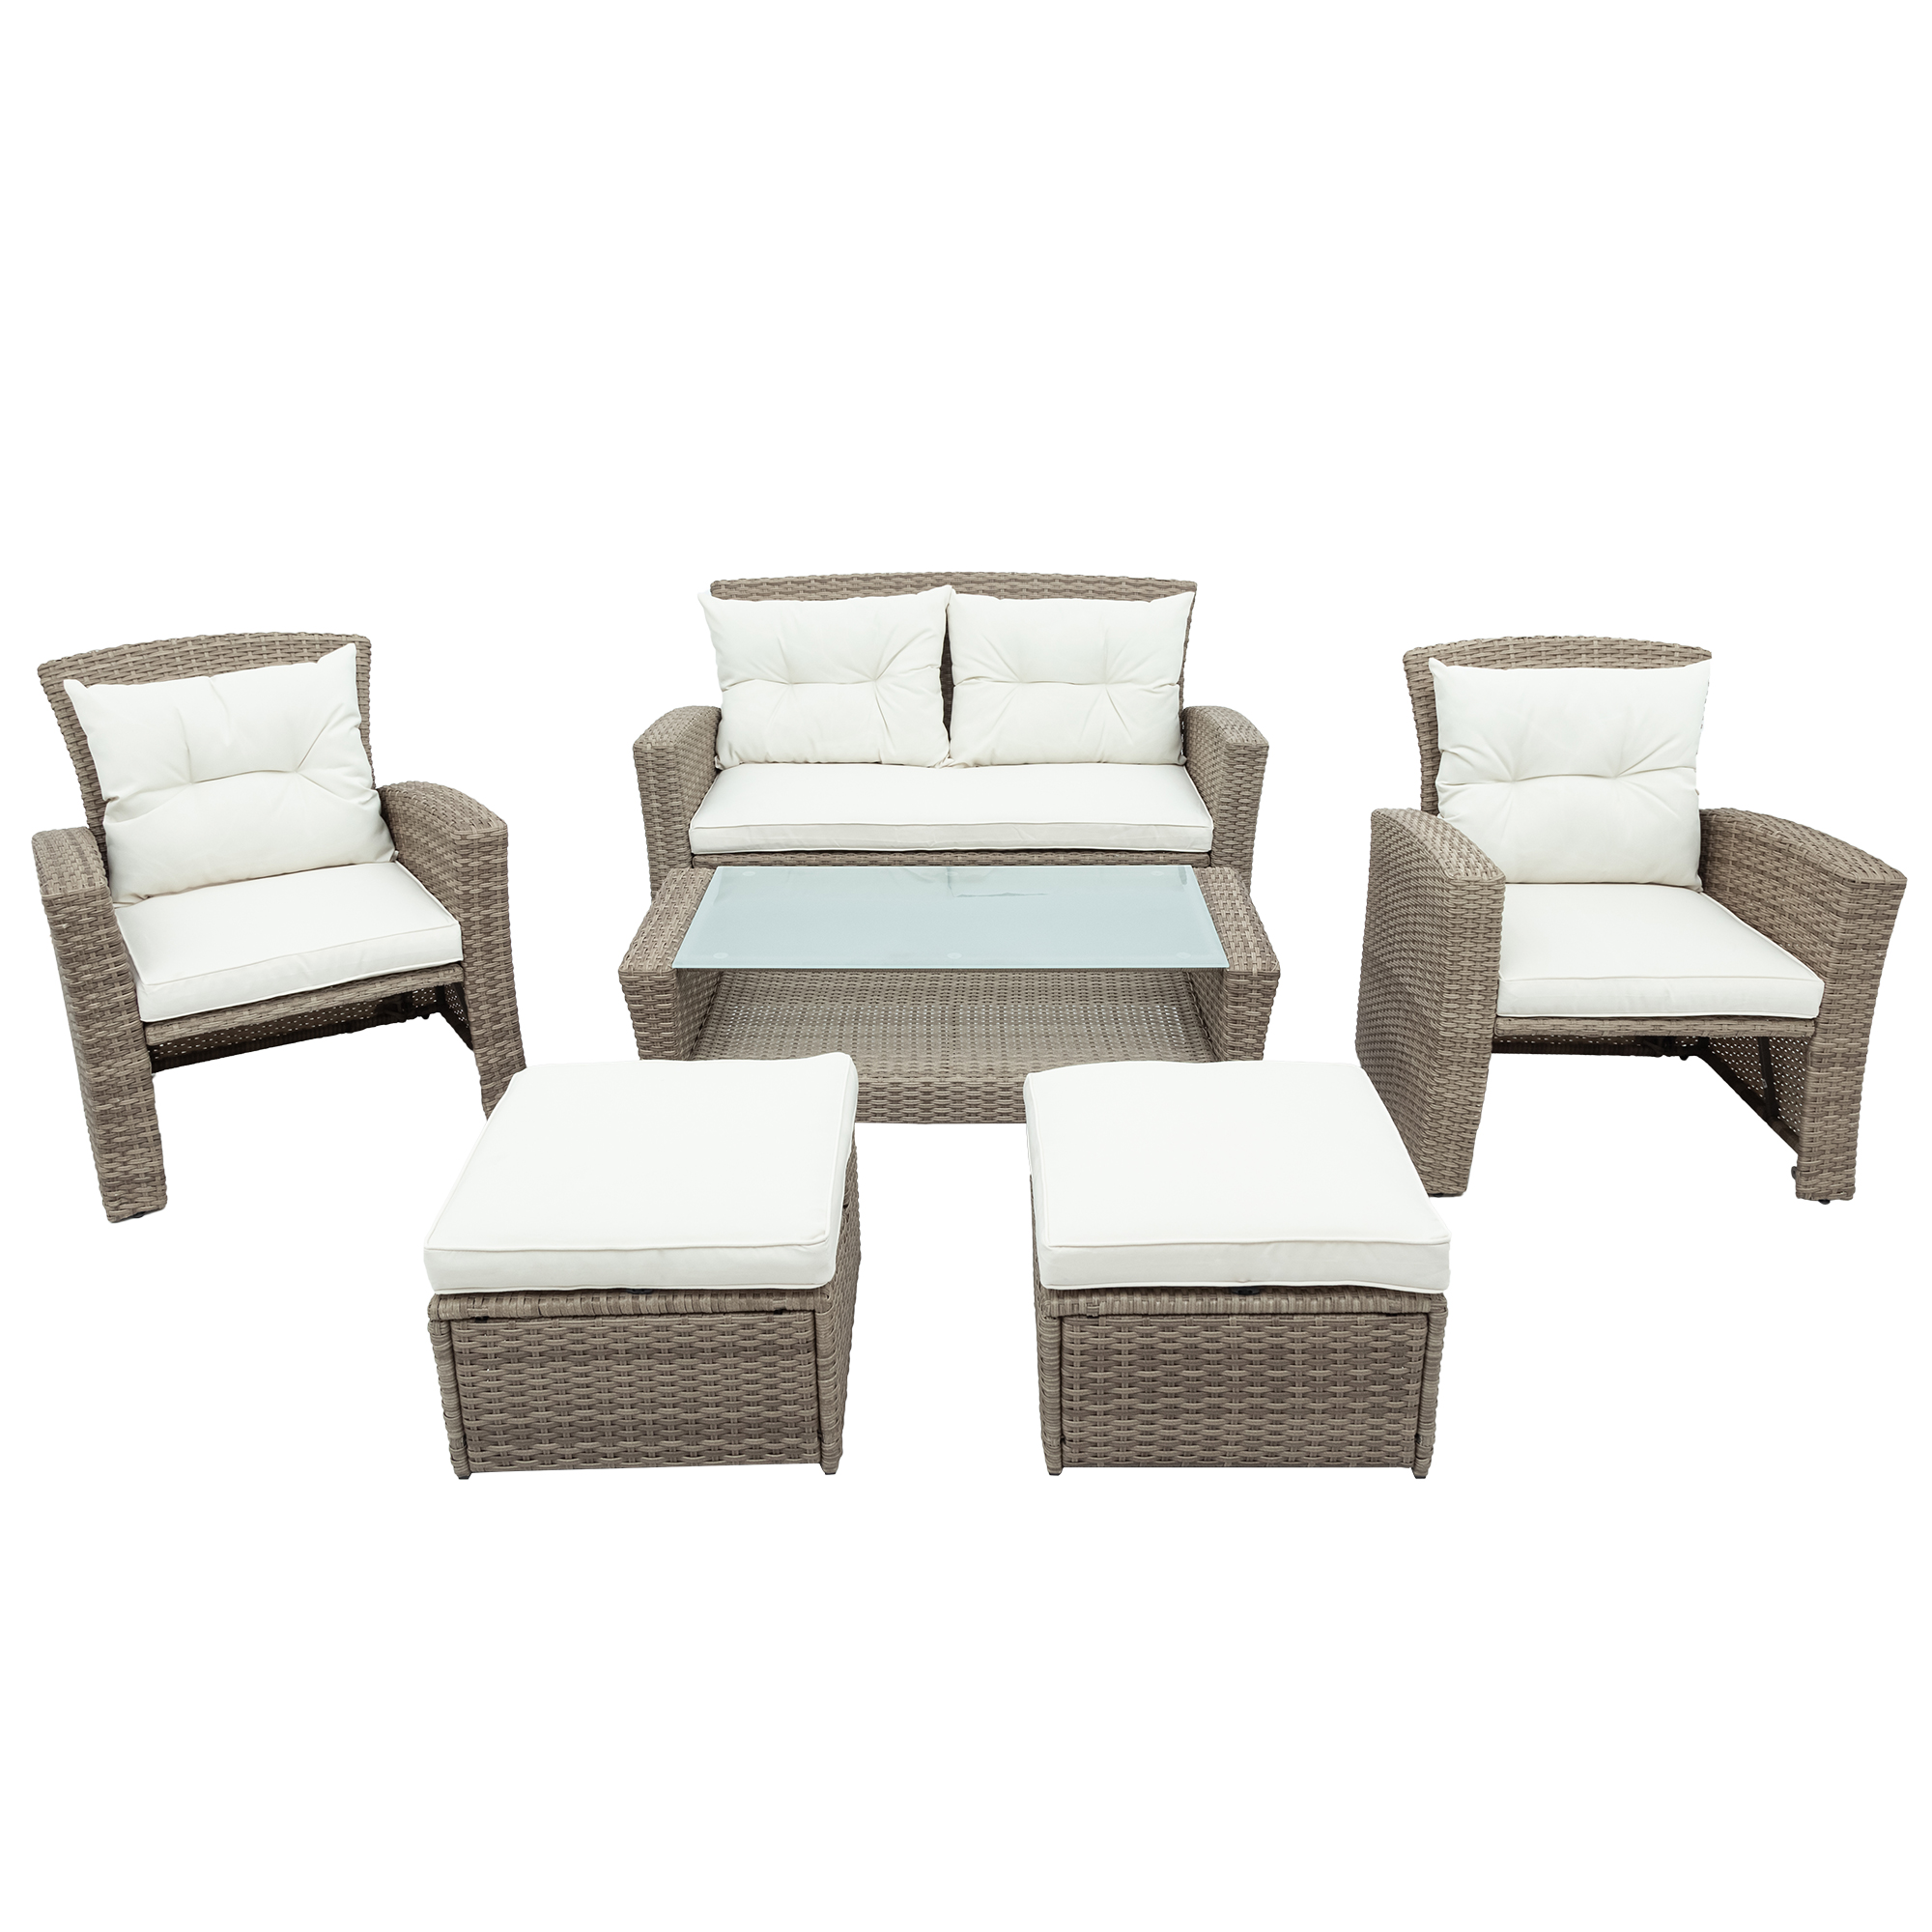 SESSLIFE 6-Piece Outdoor Sectional Sofa Set, Gray Wicker Patio Seating Sets with 19.6" High Tea Table and Soft Cushions, All-Weather Backyard Porch Garden Conversation Set - image 4 of 9